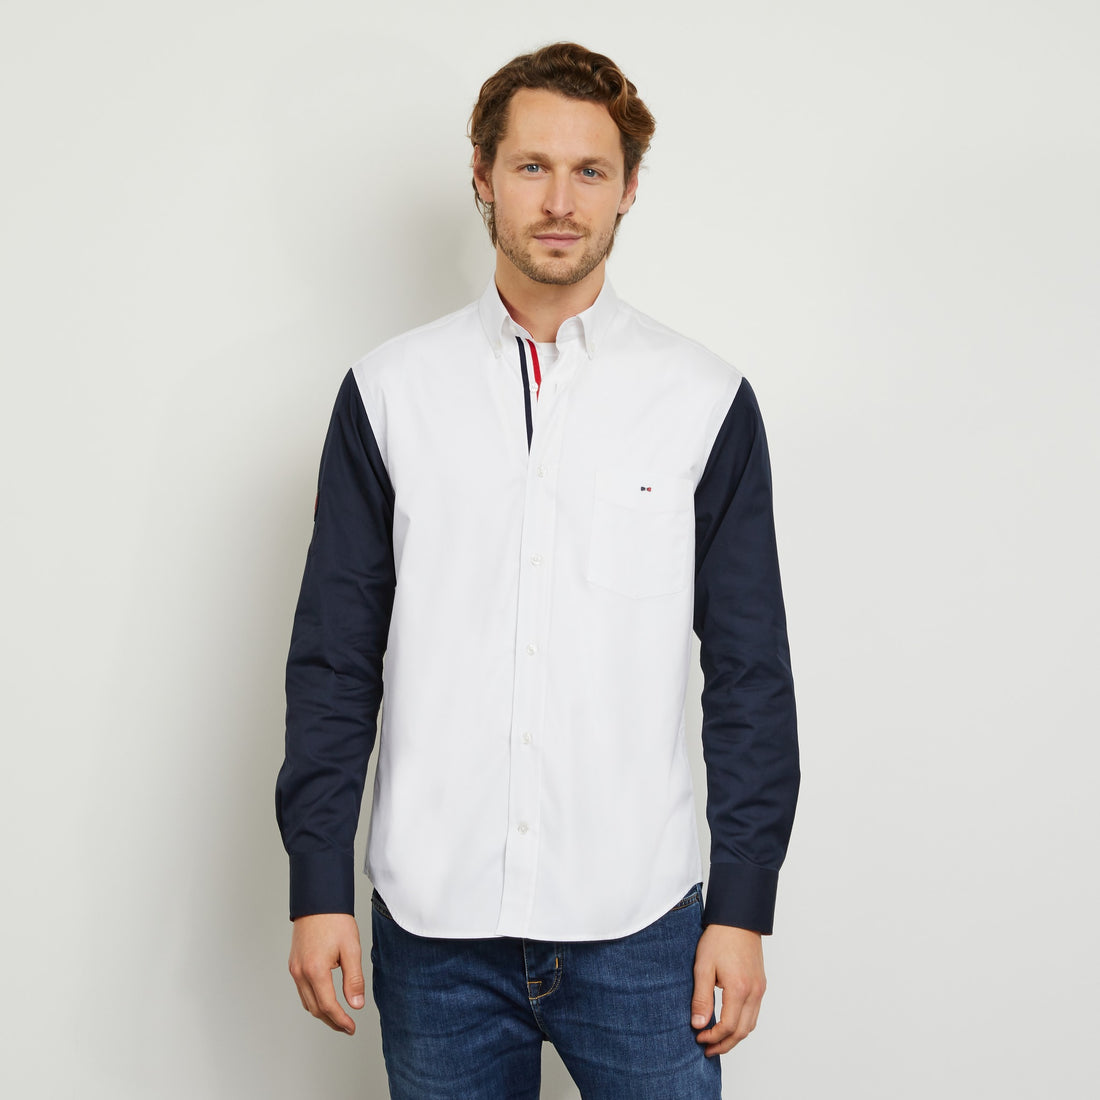 Colour-Block Shirt With France Xv Embroidery - 02